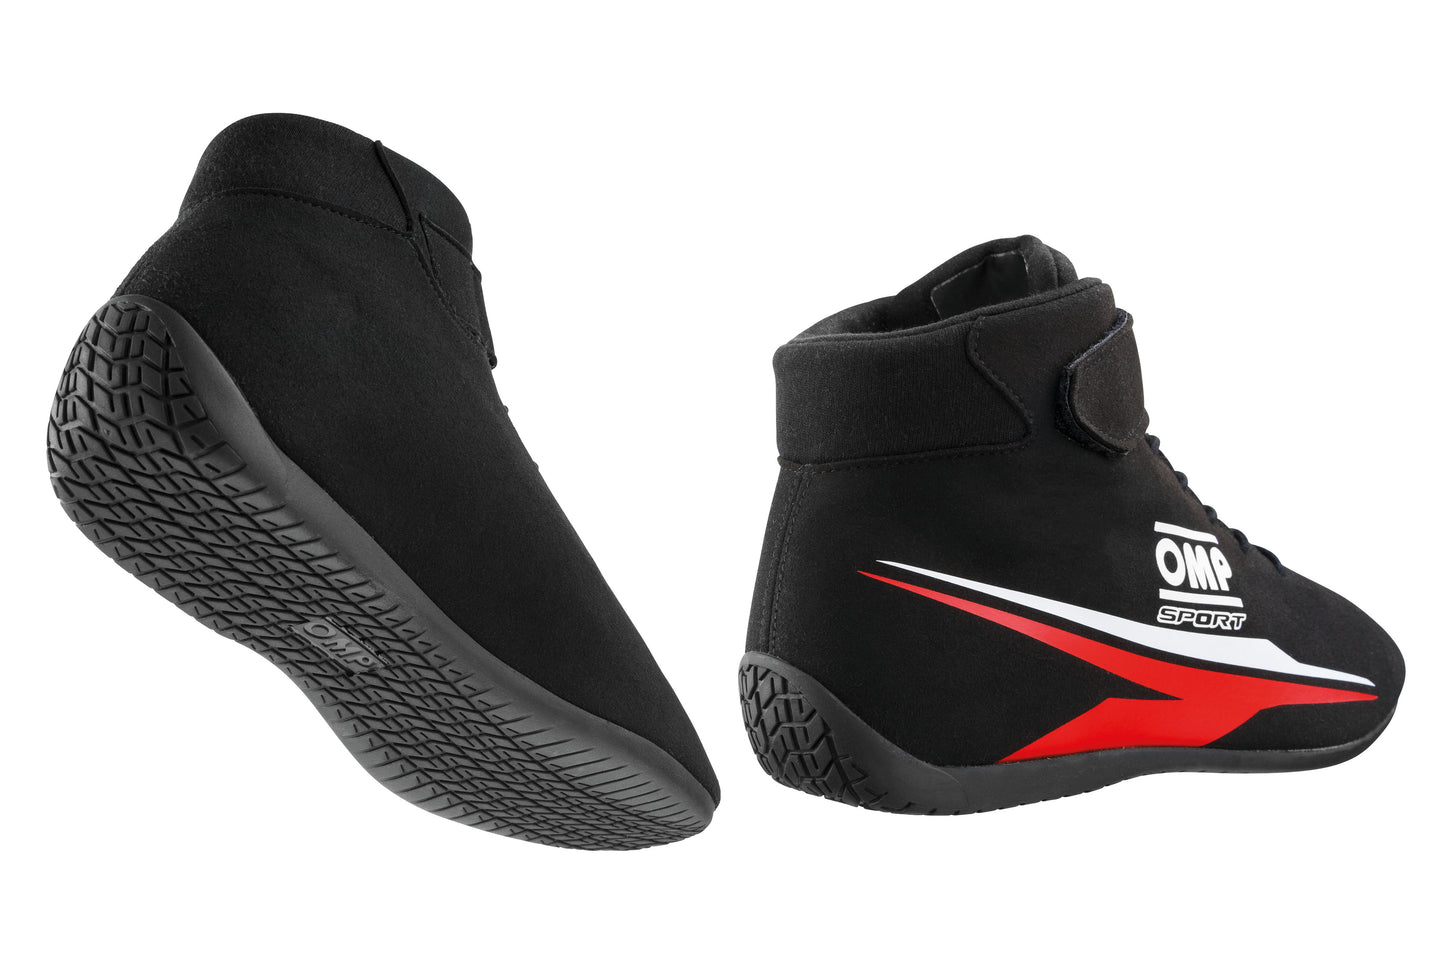 SALE! OMP SPORT RACE RALLY KARTING BOOTS MOTORSPORT FIA 8856-2018 APPROVED